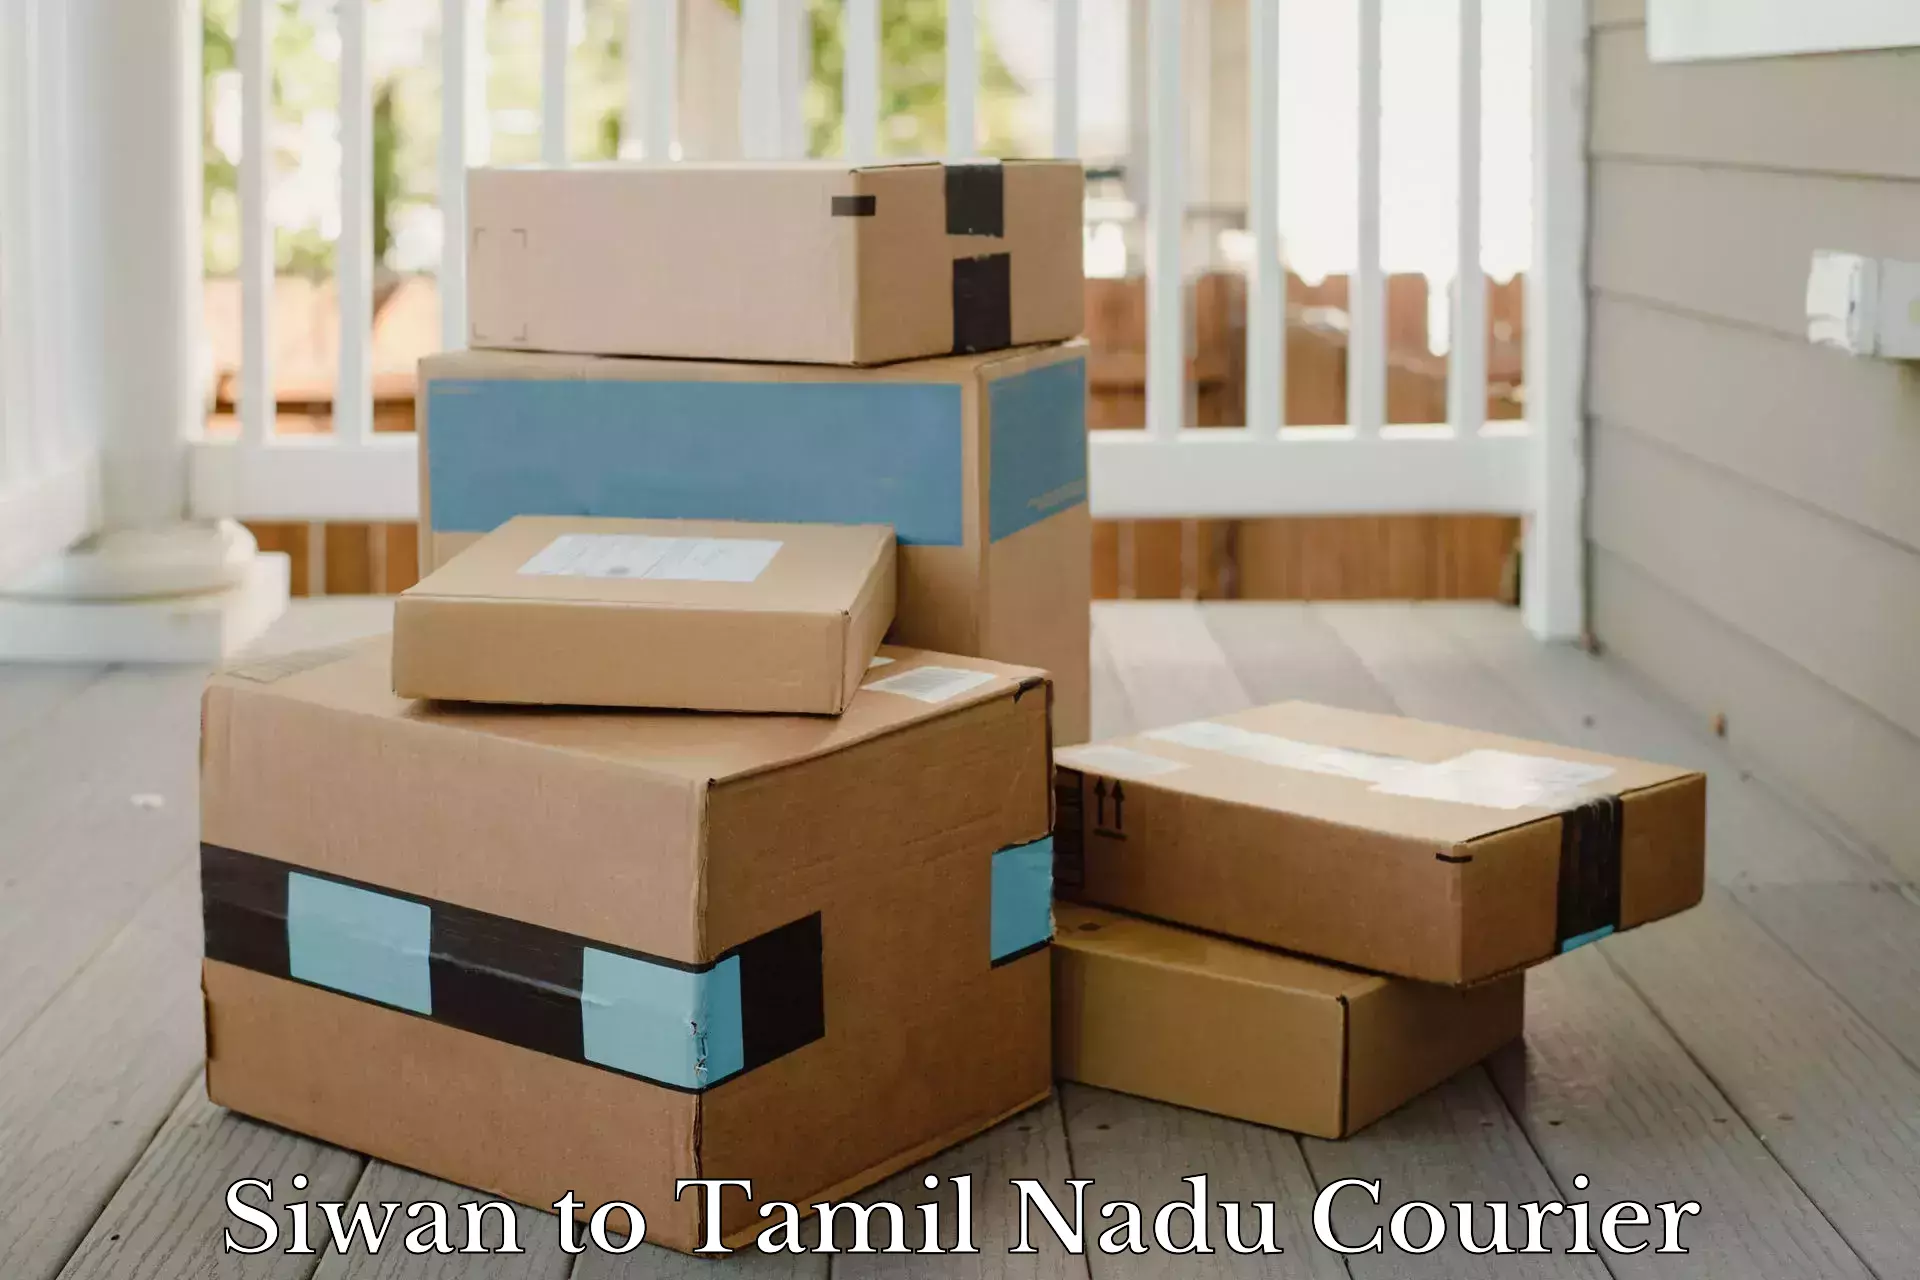 24-hour courier services Siwan to Thondi